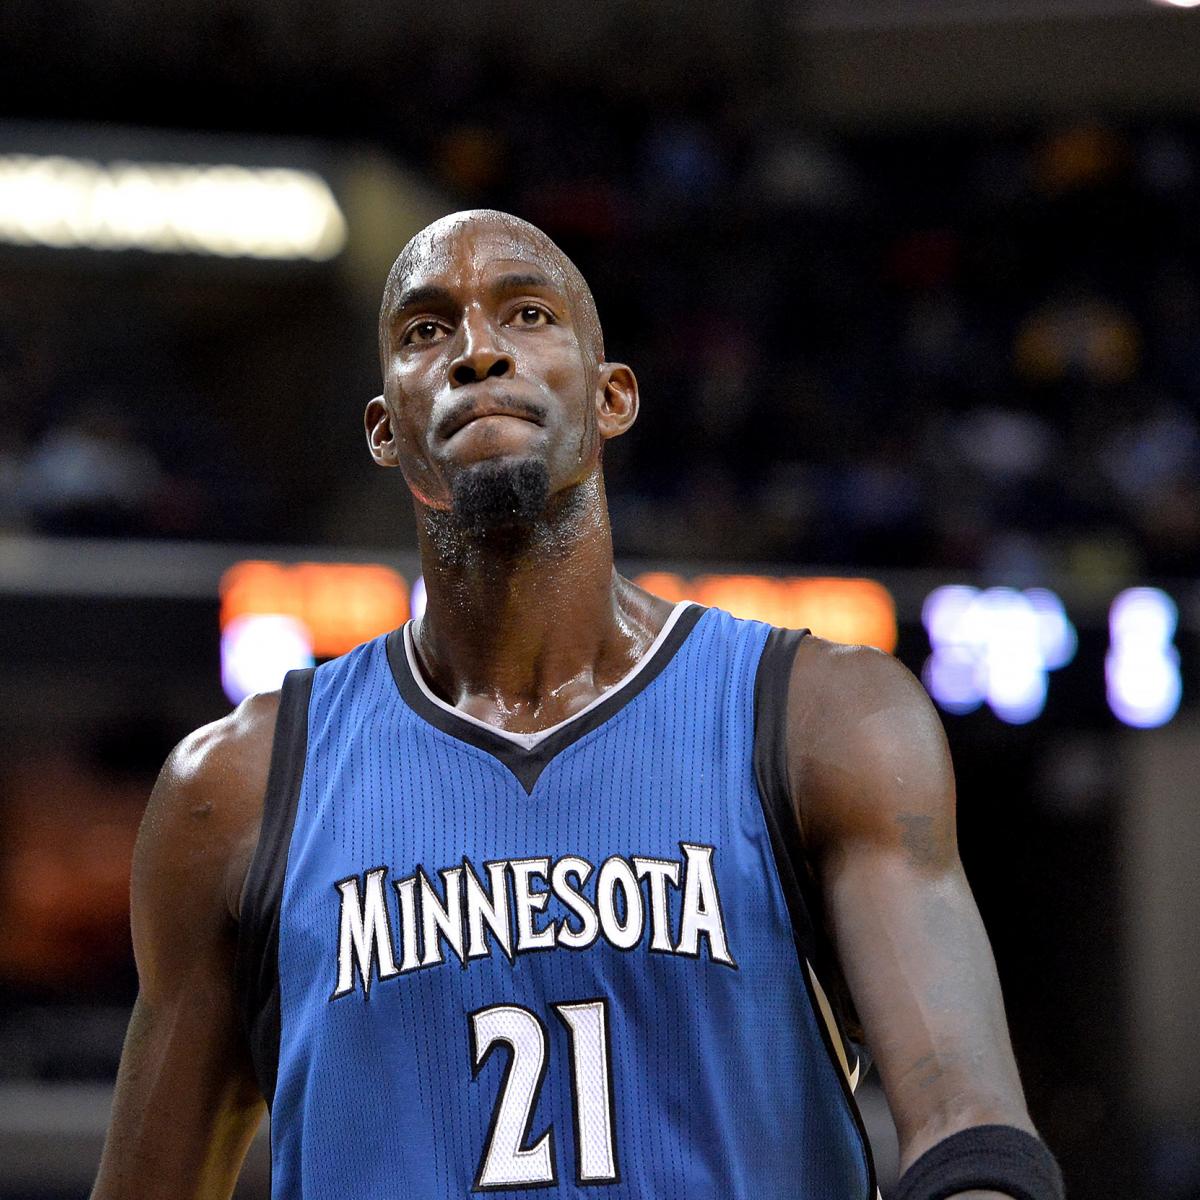 Long overdue: When will Kevin Garnett's No. 21 be retired by Wolves?